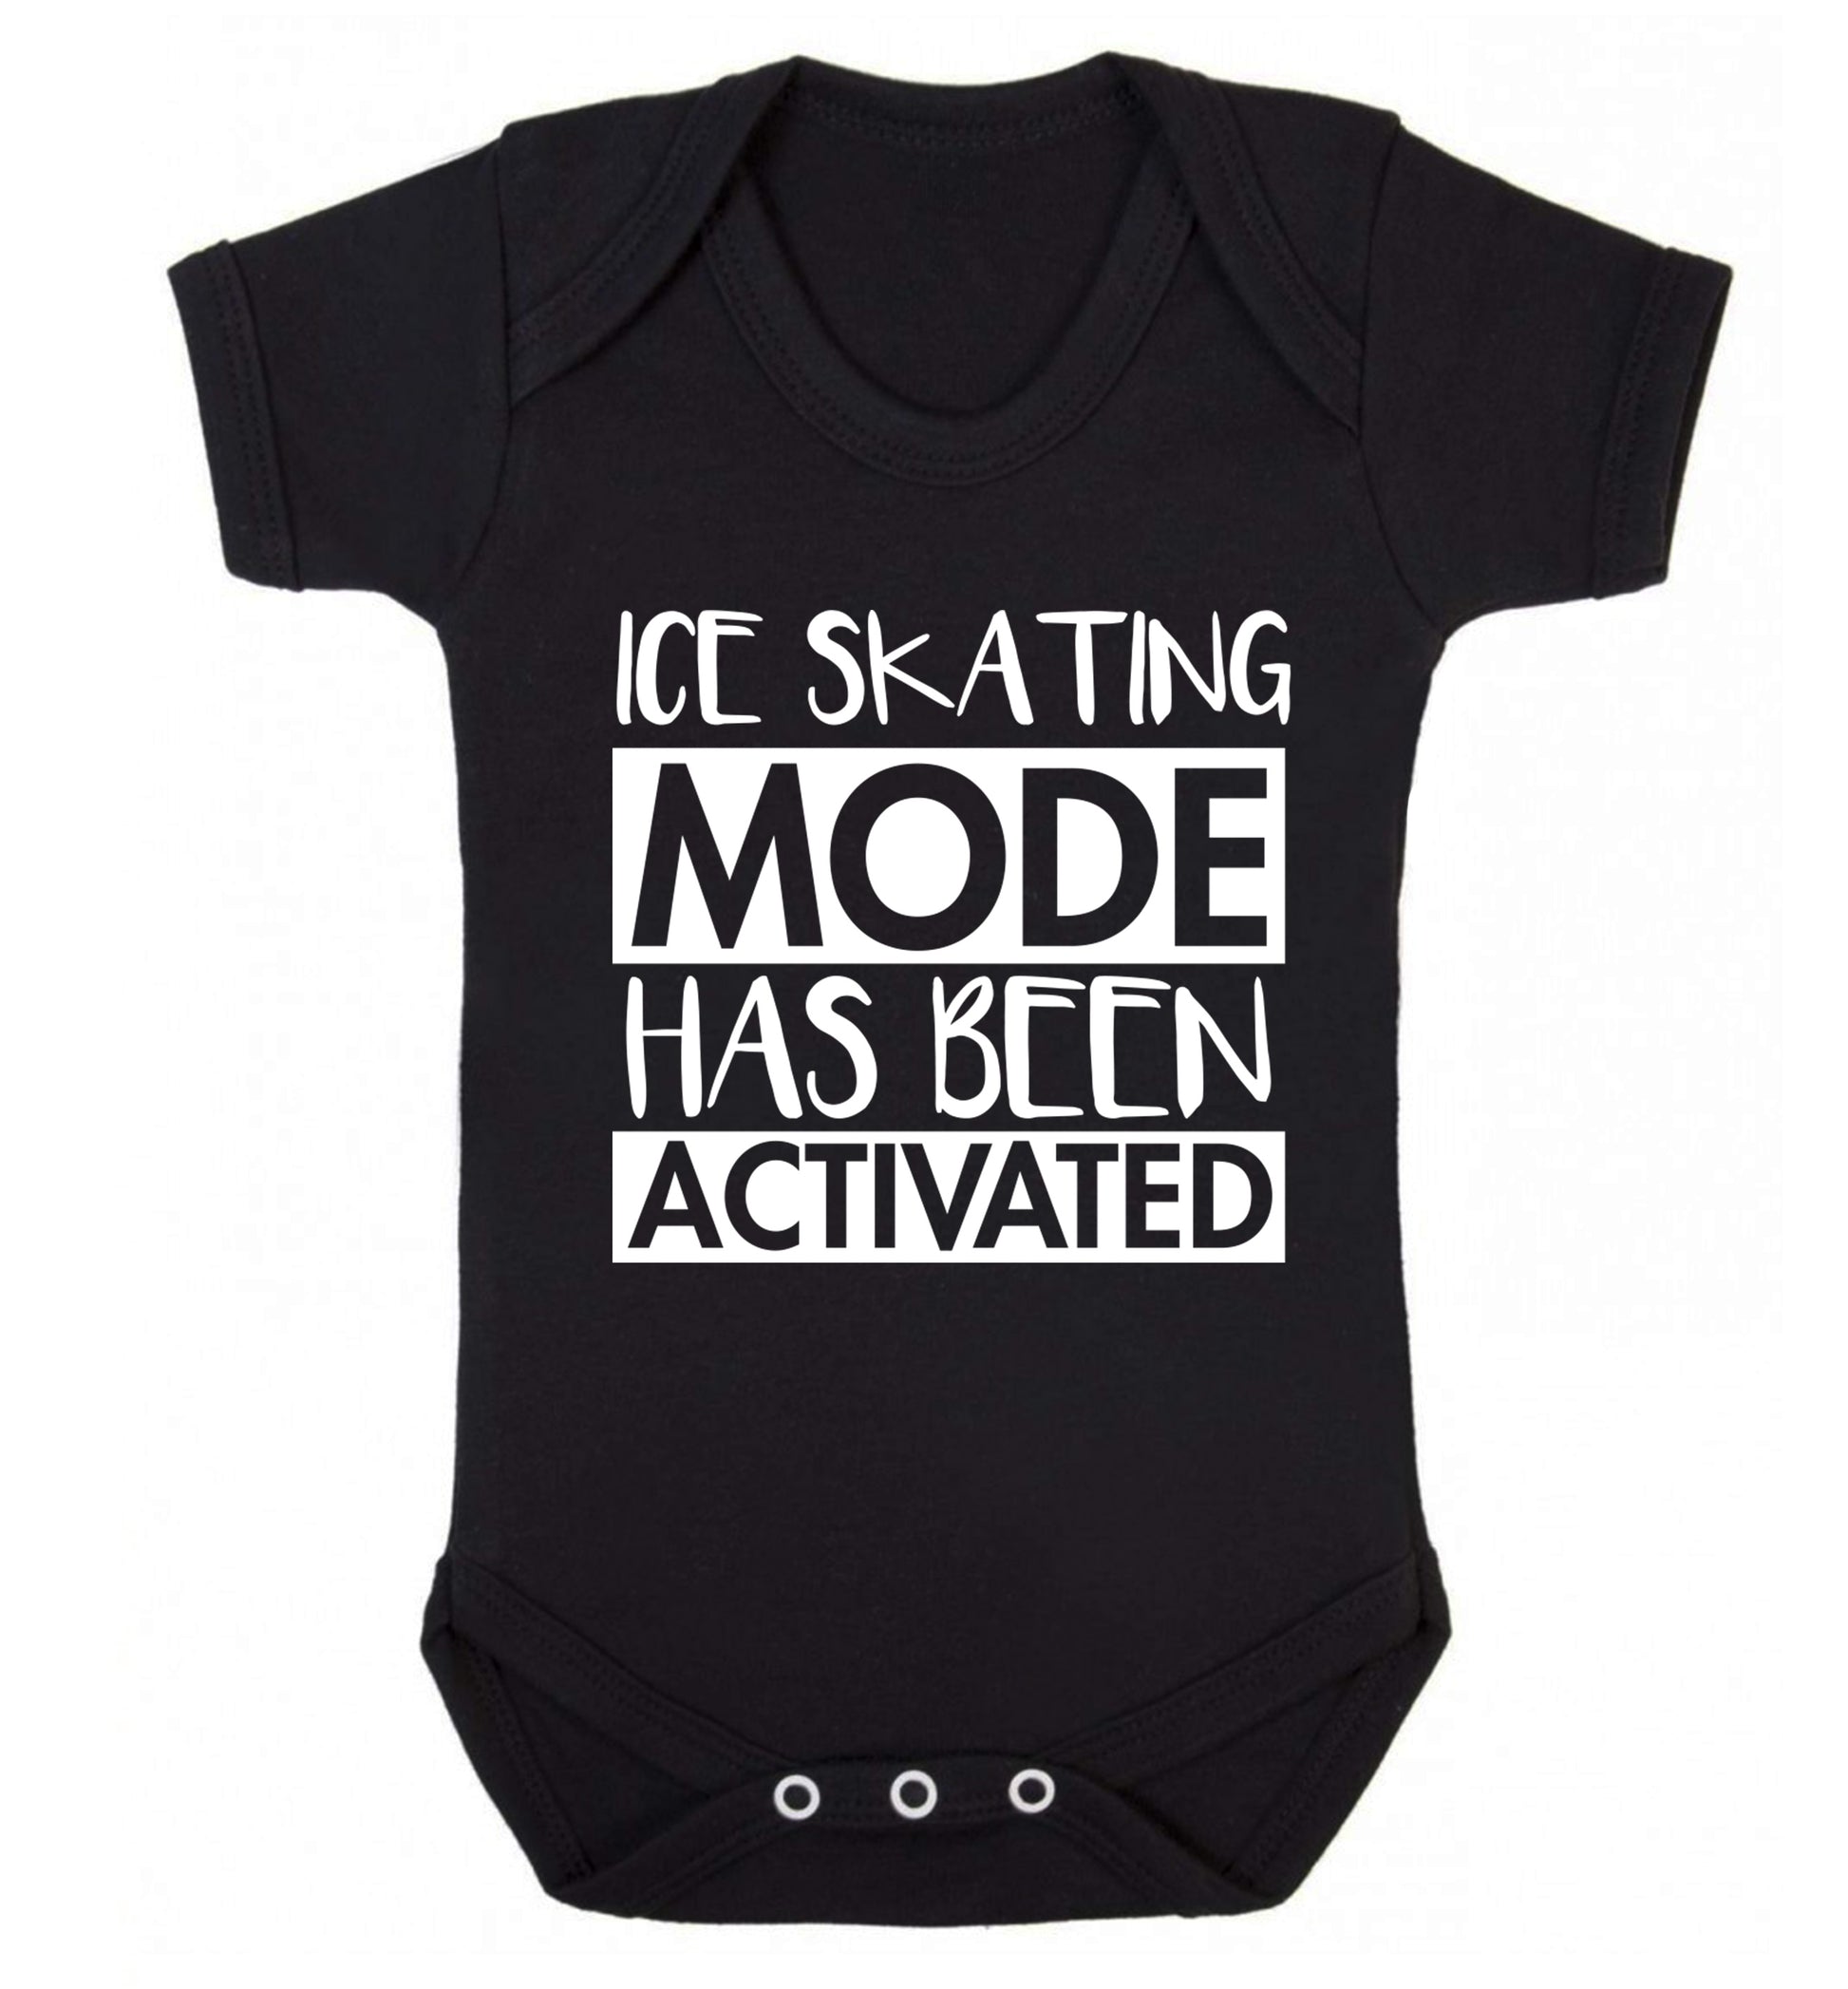 Ice skating mode activated Baby Vest black 18-24 months